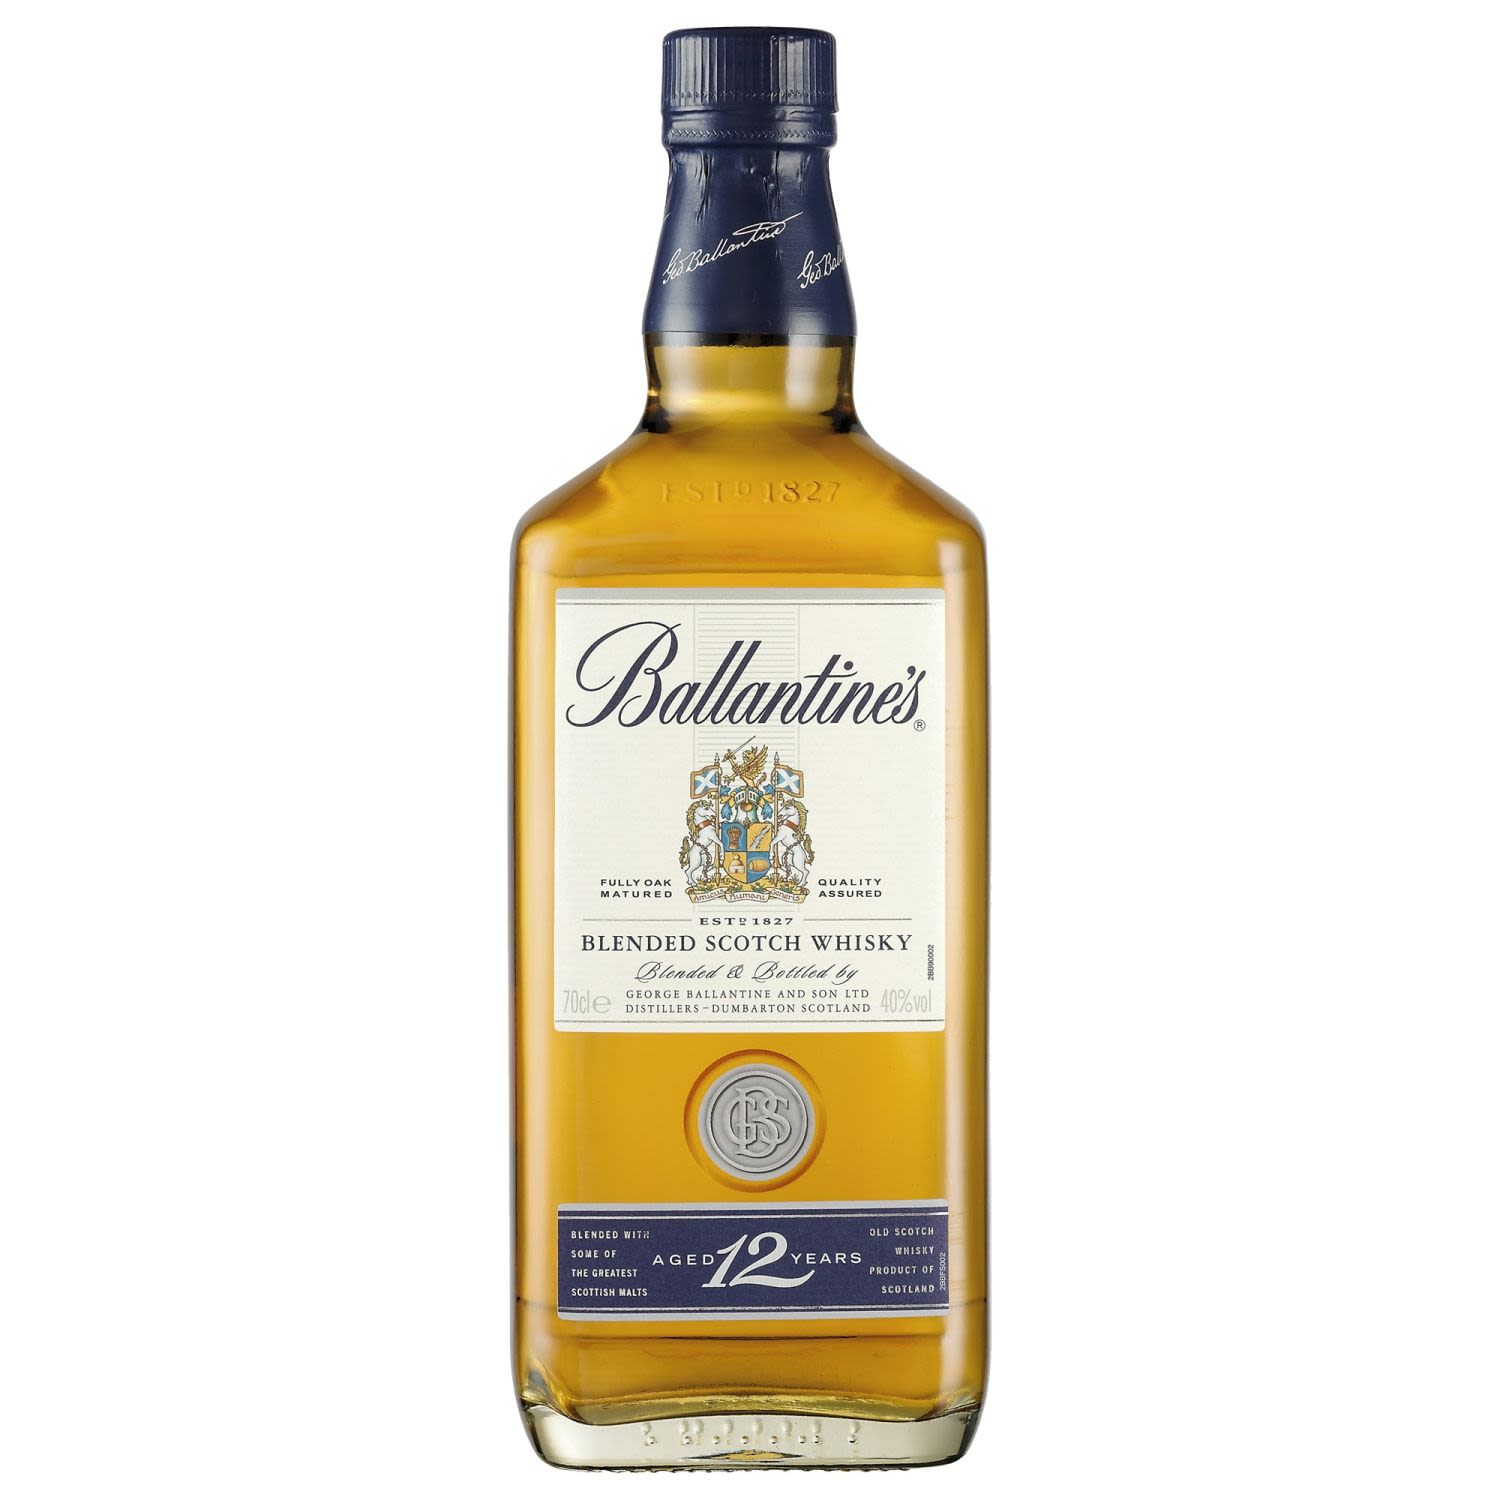 A perfectly balanced Scotch, Ballantines embodies the approachable style. With rich creaminess and hints of vanilla oak Ballantines 12 year old will leave you with its floral aroma long after you have finished it.<br /> <br />Alcohol Volume: 40.00%<br /><br />Pack Format: Bottle<br /><br />Standard Drinks: 22</br /><br />Pack Type: Bottle<br /><br />Country of Origin: Scotland<br />